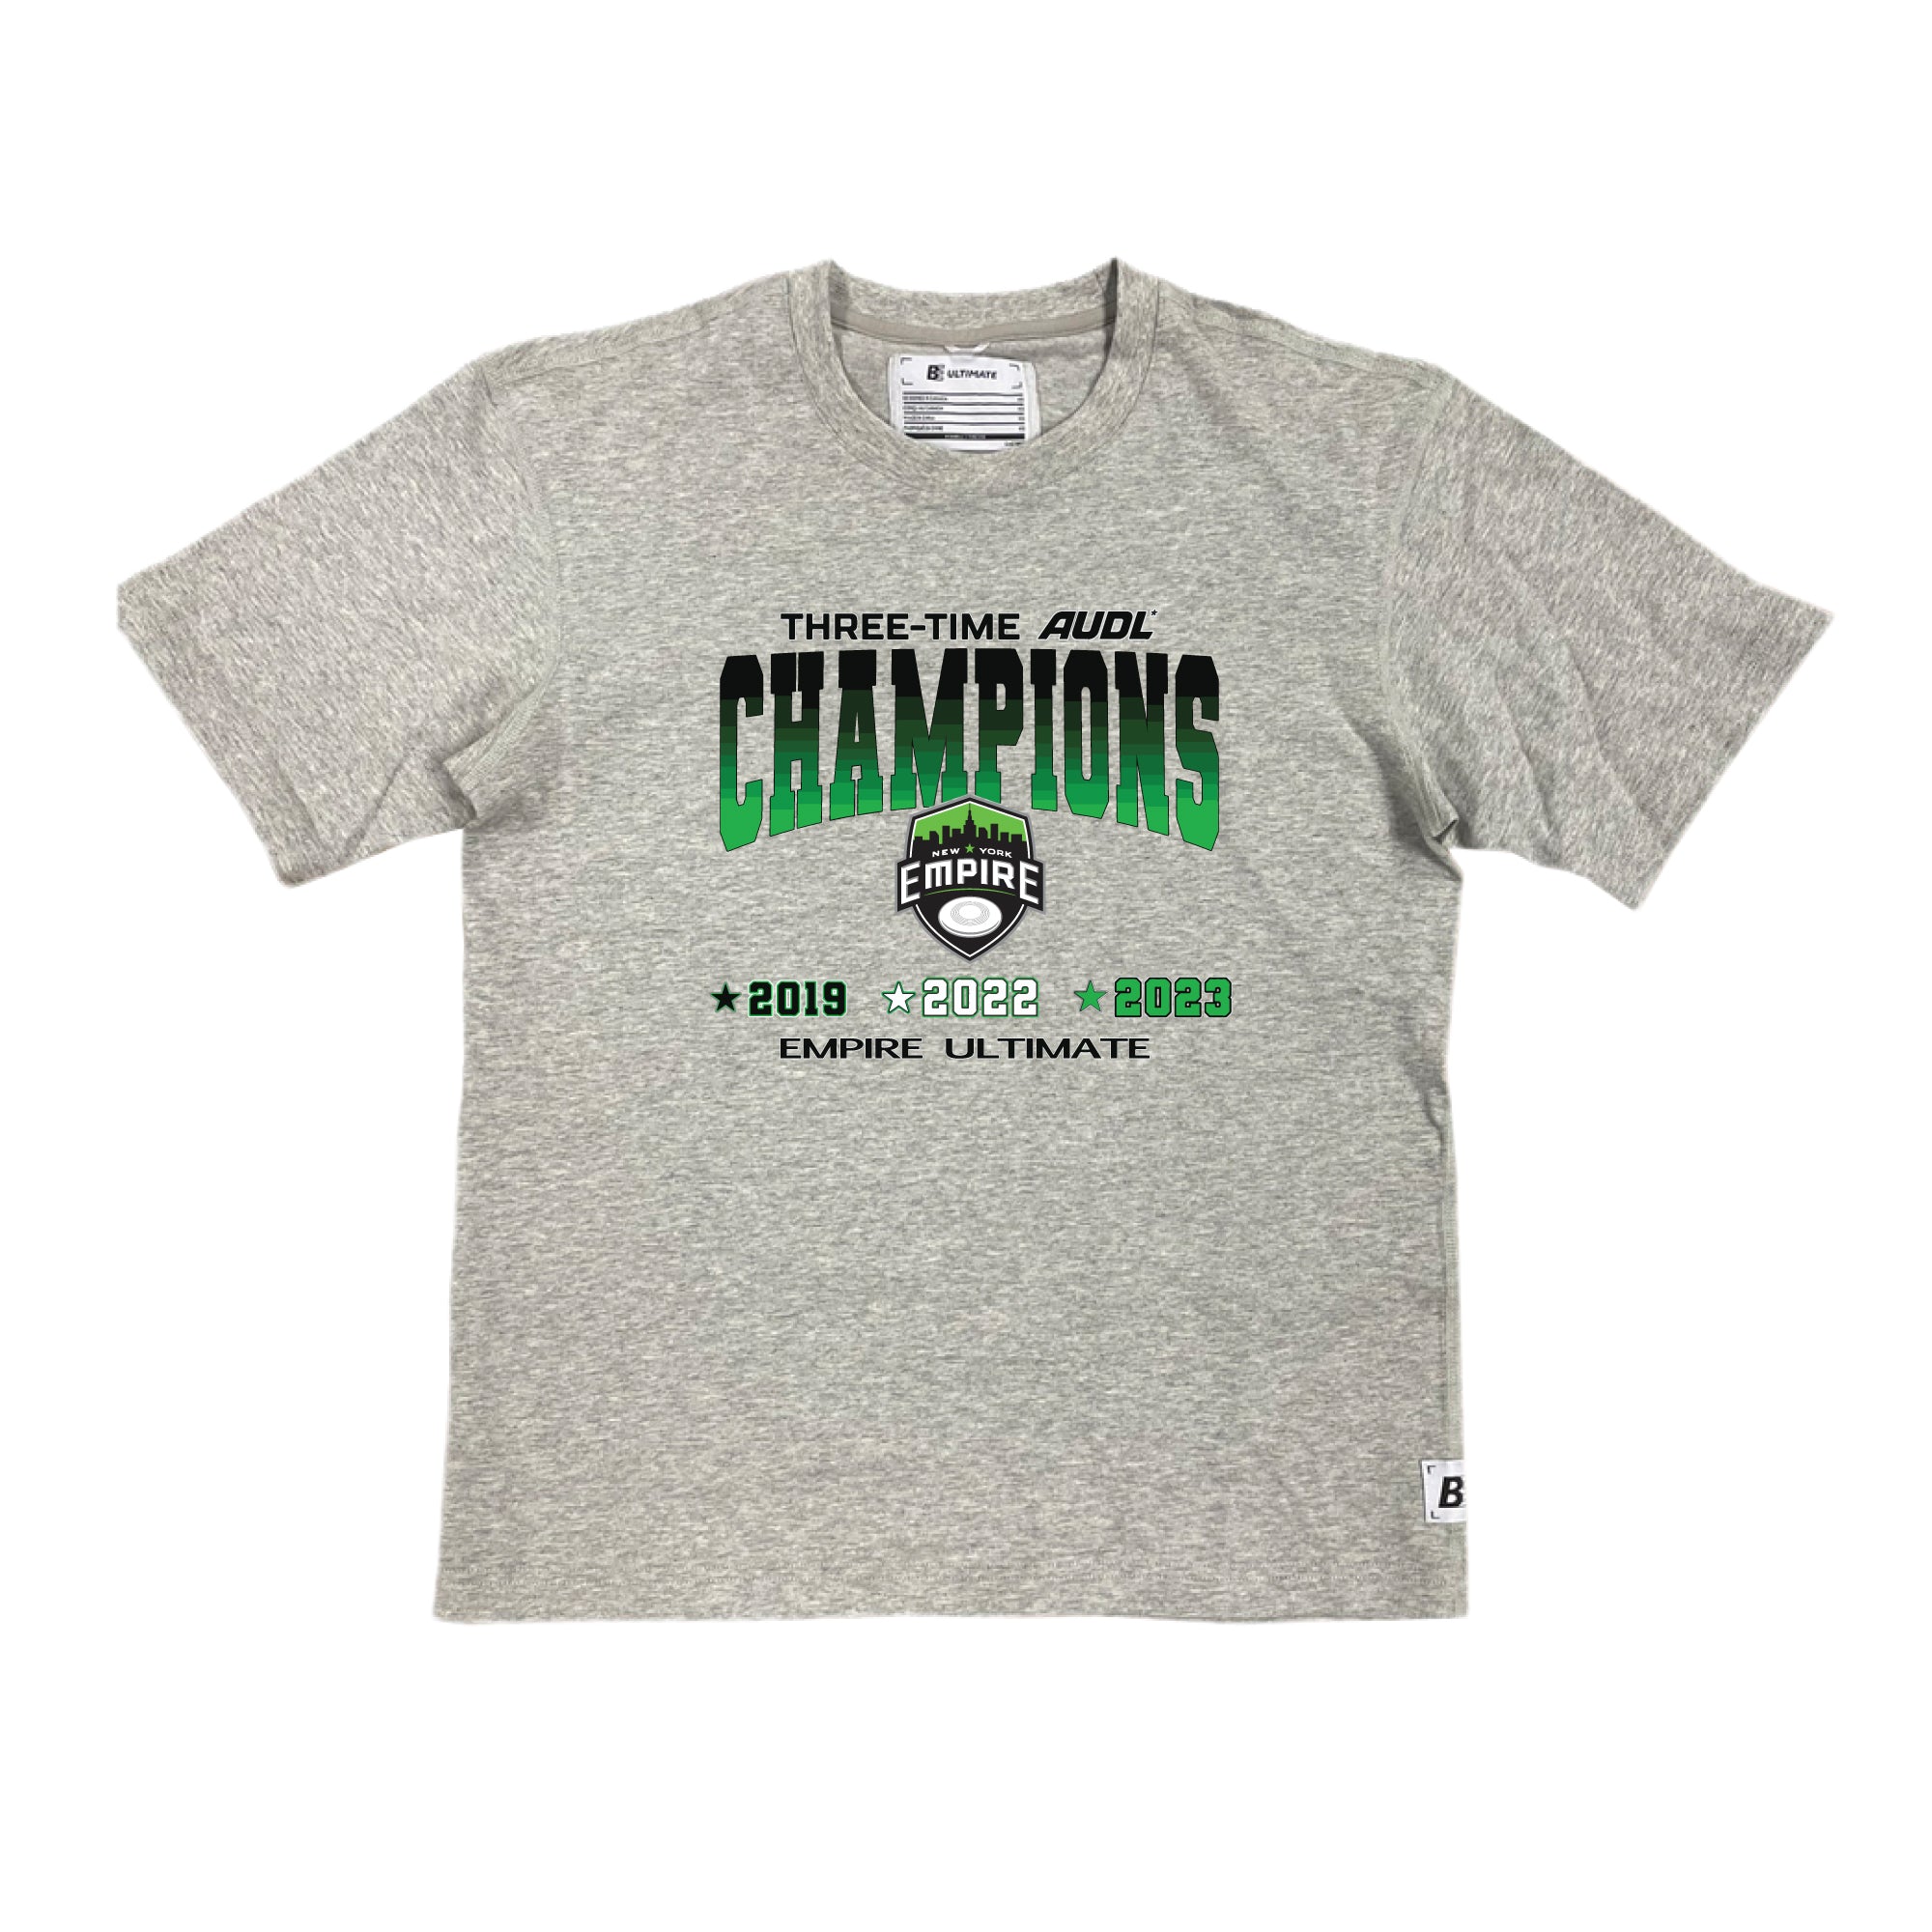 Three-Time AUDL Champions Tee